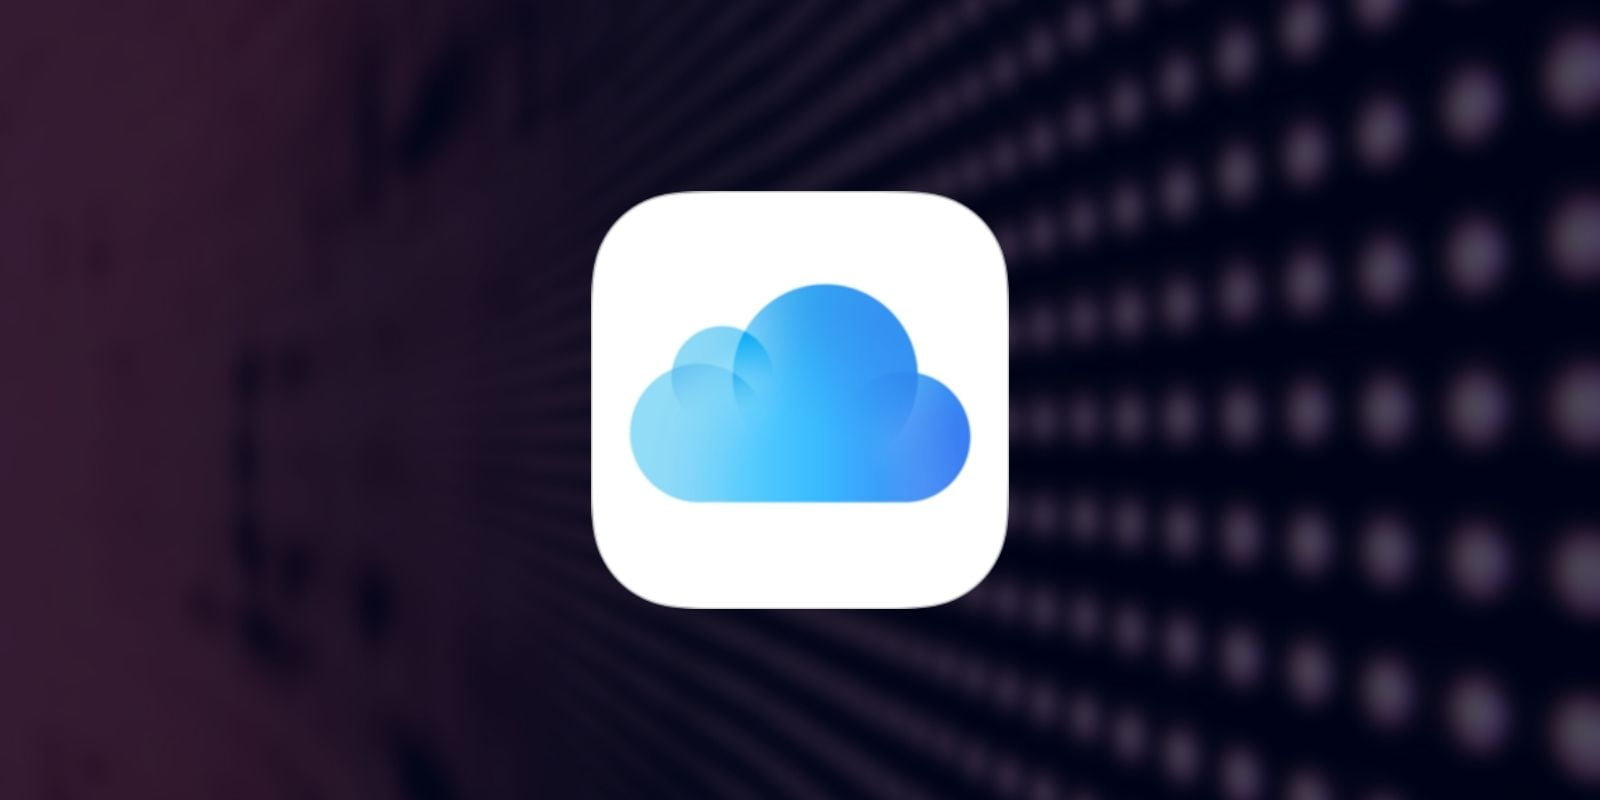 Apple Brings Password Manager To Icloud For Windows In The Latest Update